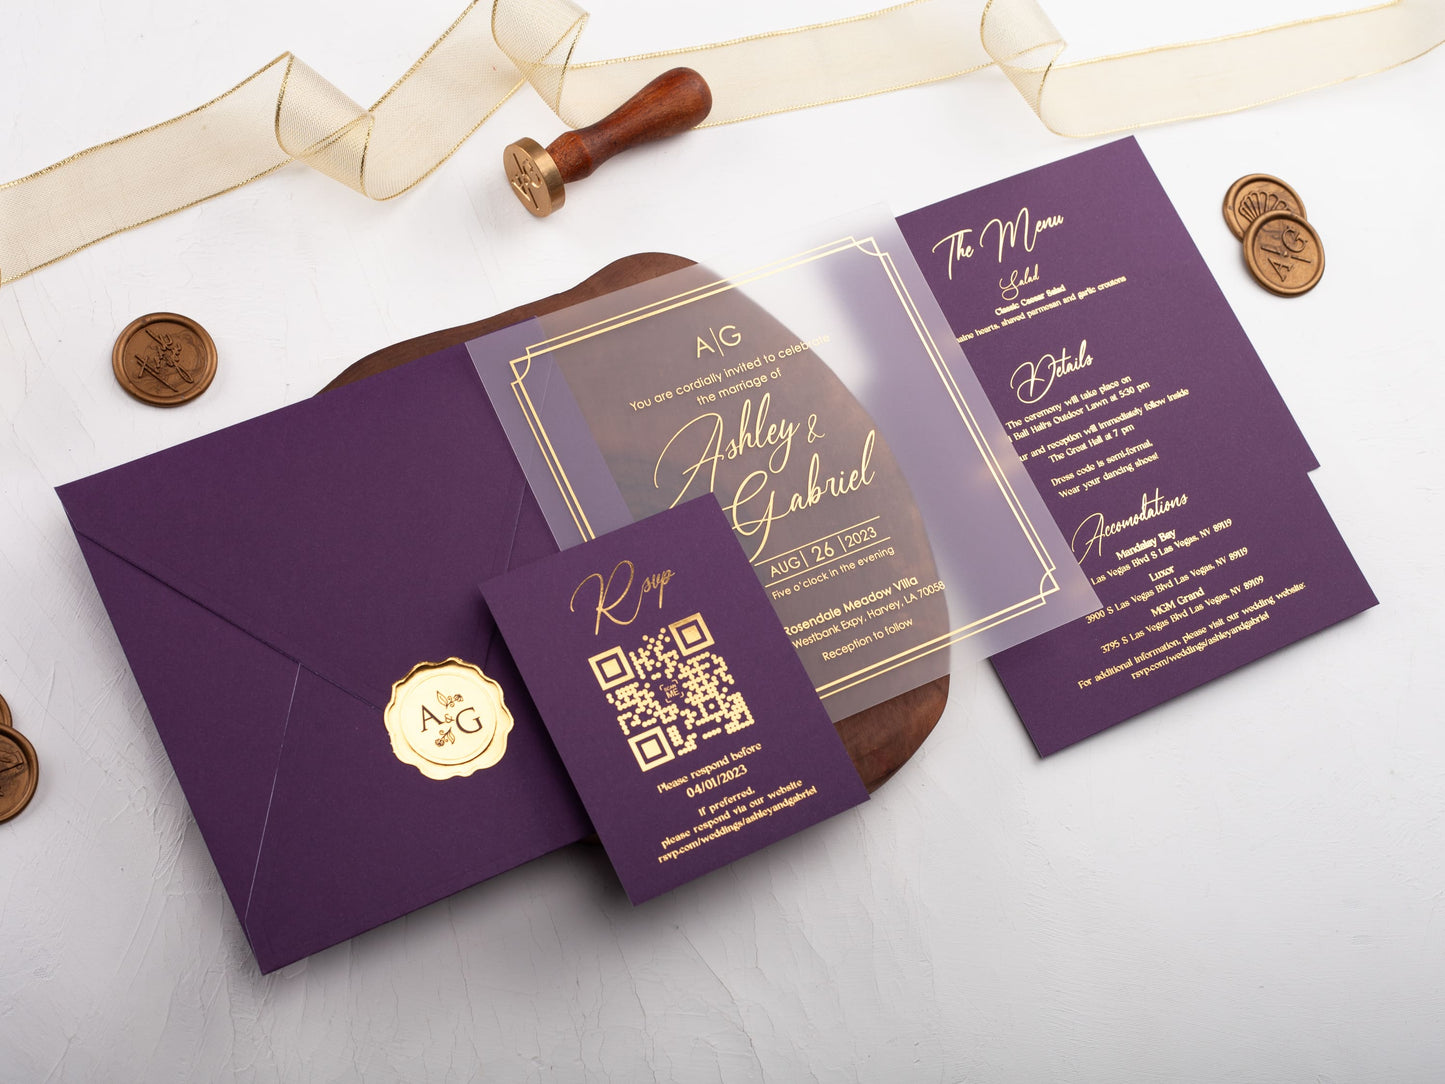 Acrylic Wedding Invitation with Gold Foil and Purple Envelope